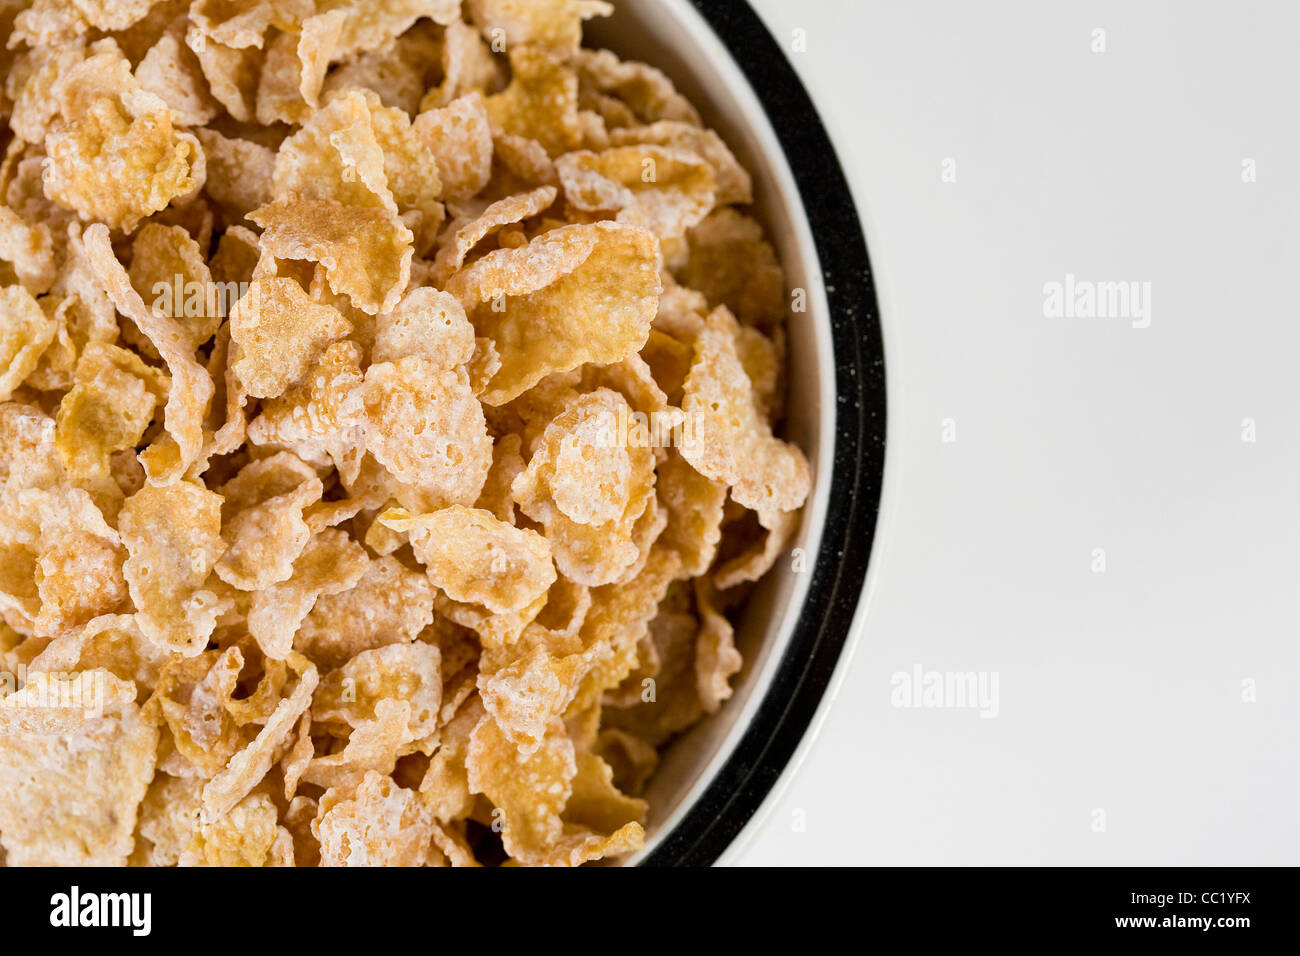 Frosted Flakes breakfast cereal. Stock Photo